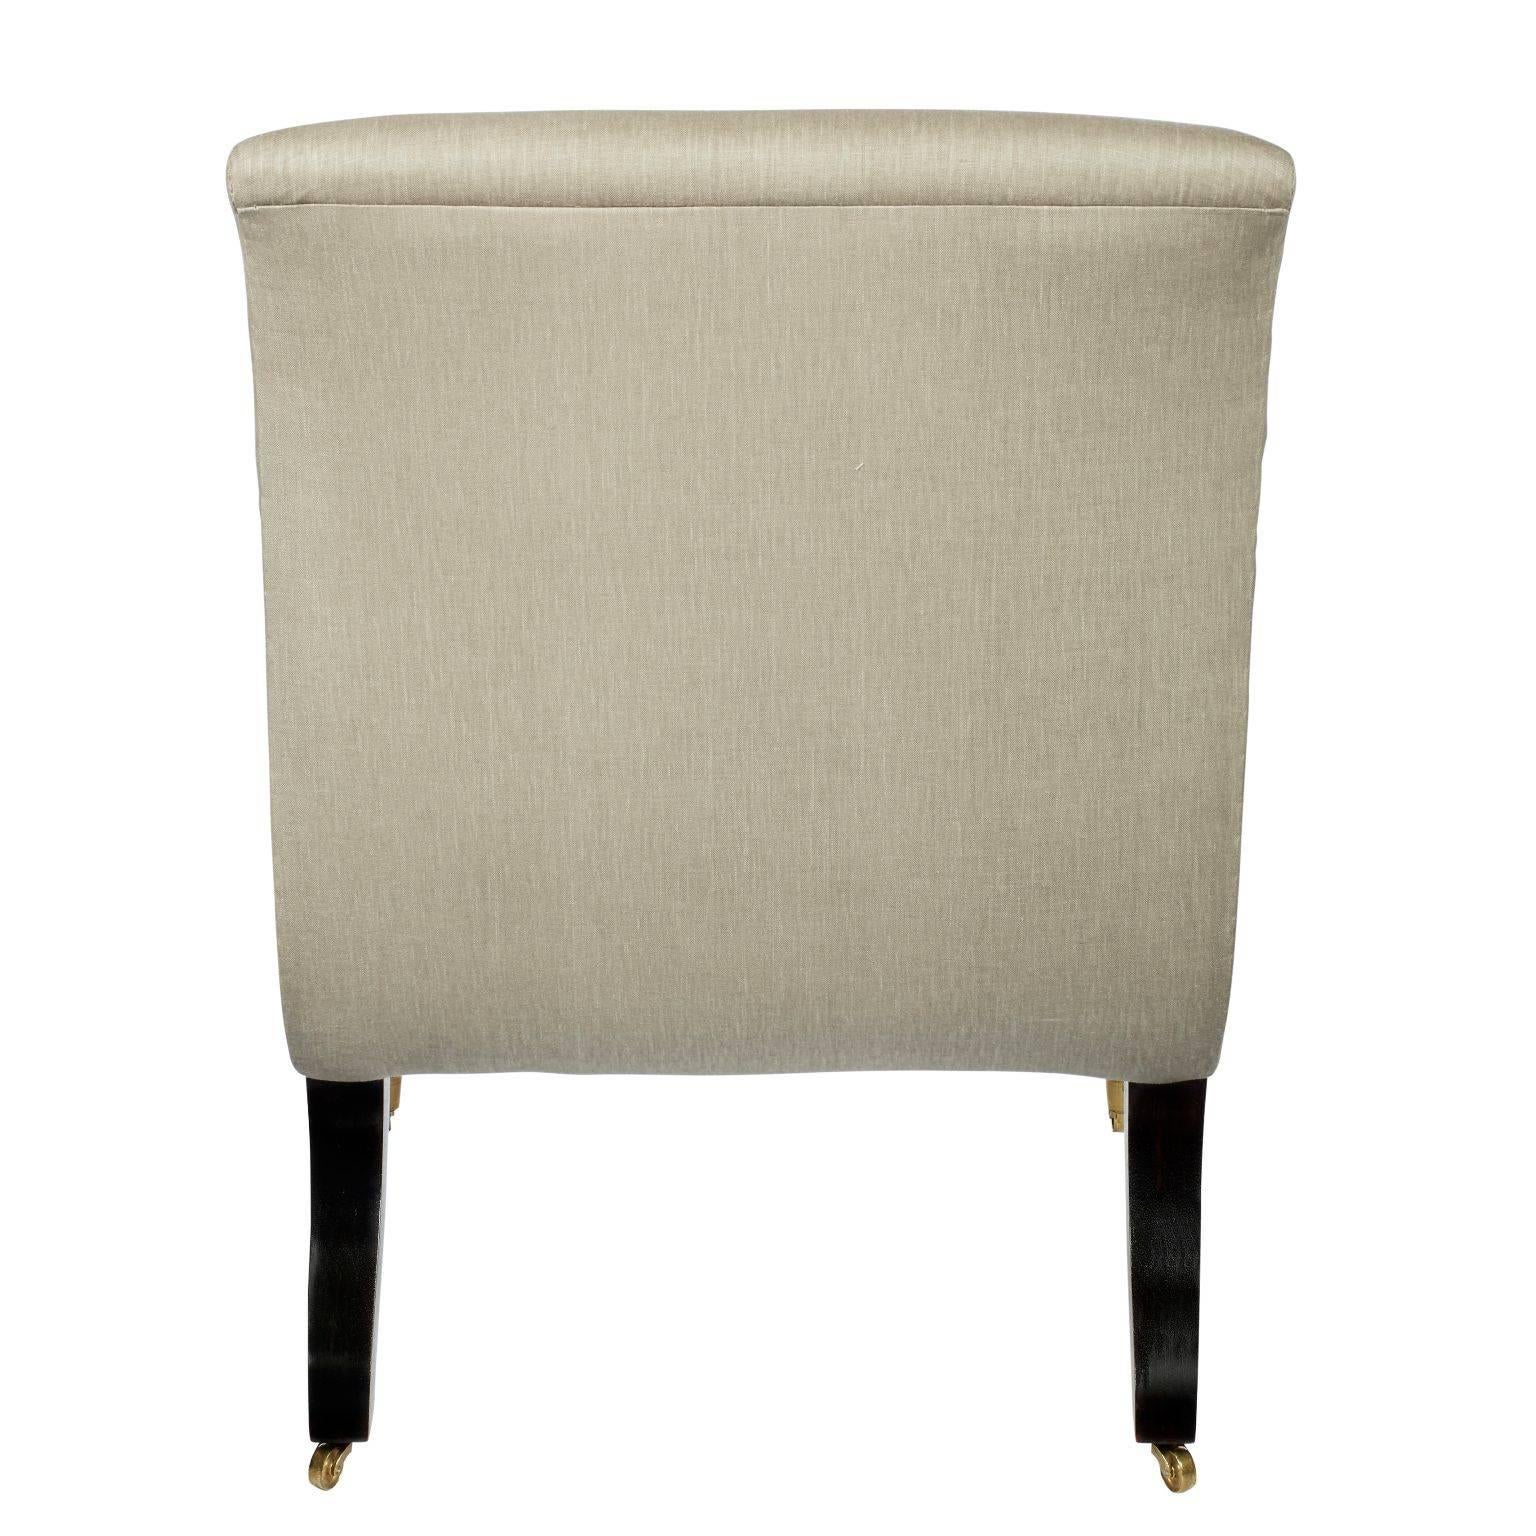 Regency 'Hope' Library Chair by Ensemblier, Custom-Made and Upholstered For Sale